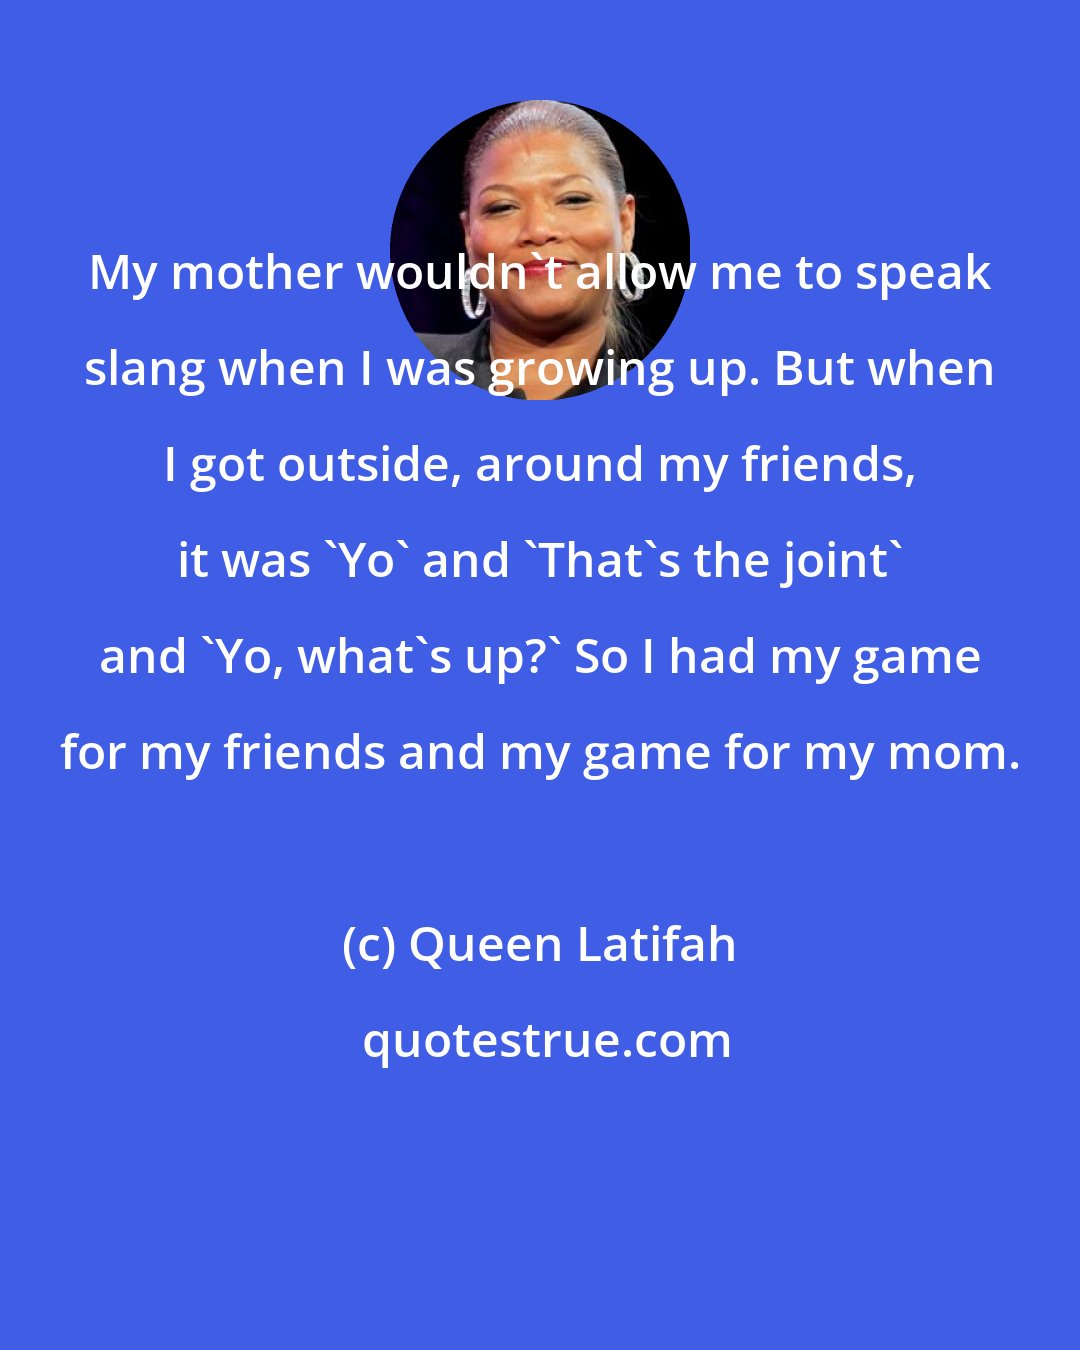 Queen Latifah: My mother wouldn't allow me to speak slang when I was growing up. But when I got outside, around my friends, it was 'Yo' and 'That's the joint' and 'Yo, what's up?' So I had my game for my friends and my game for my mom.